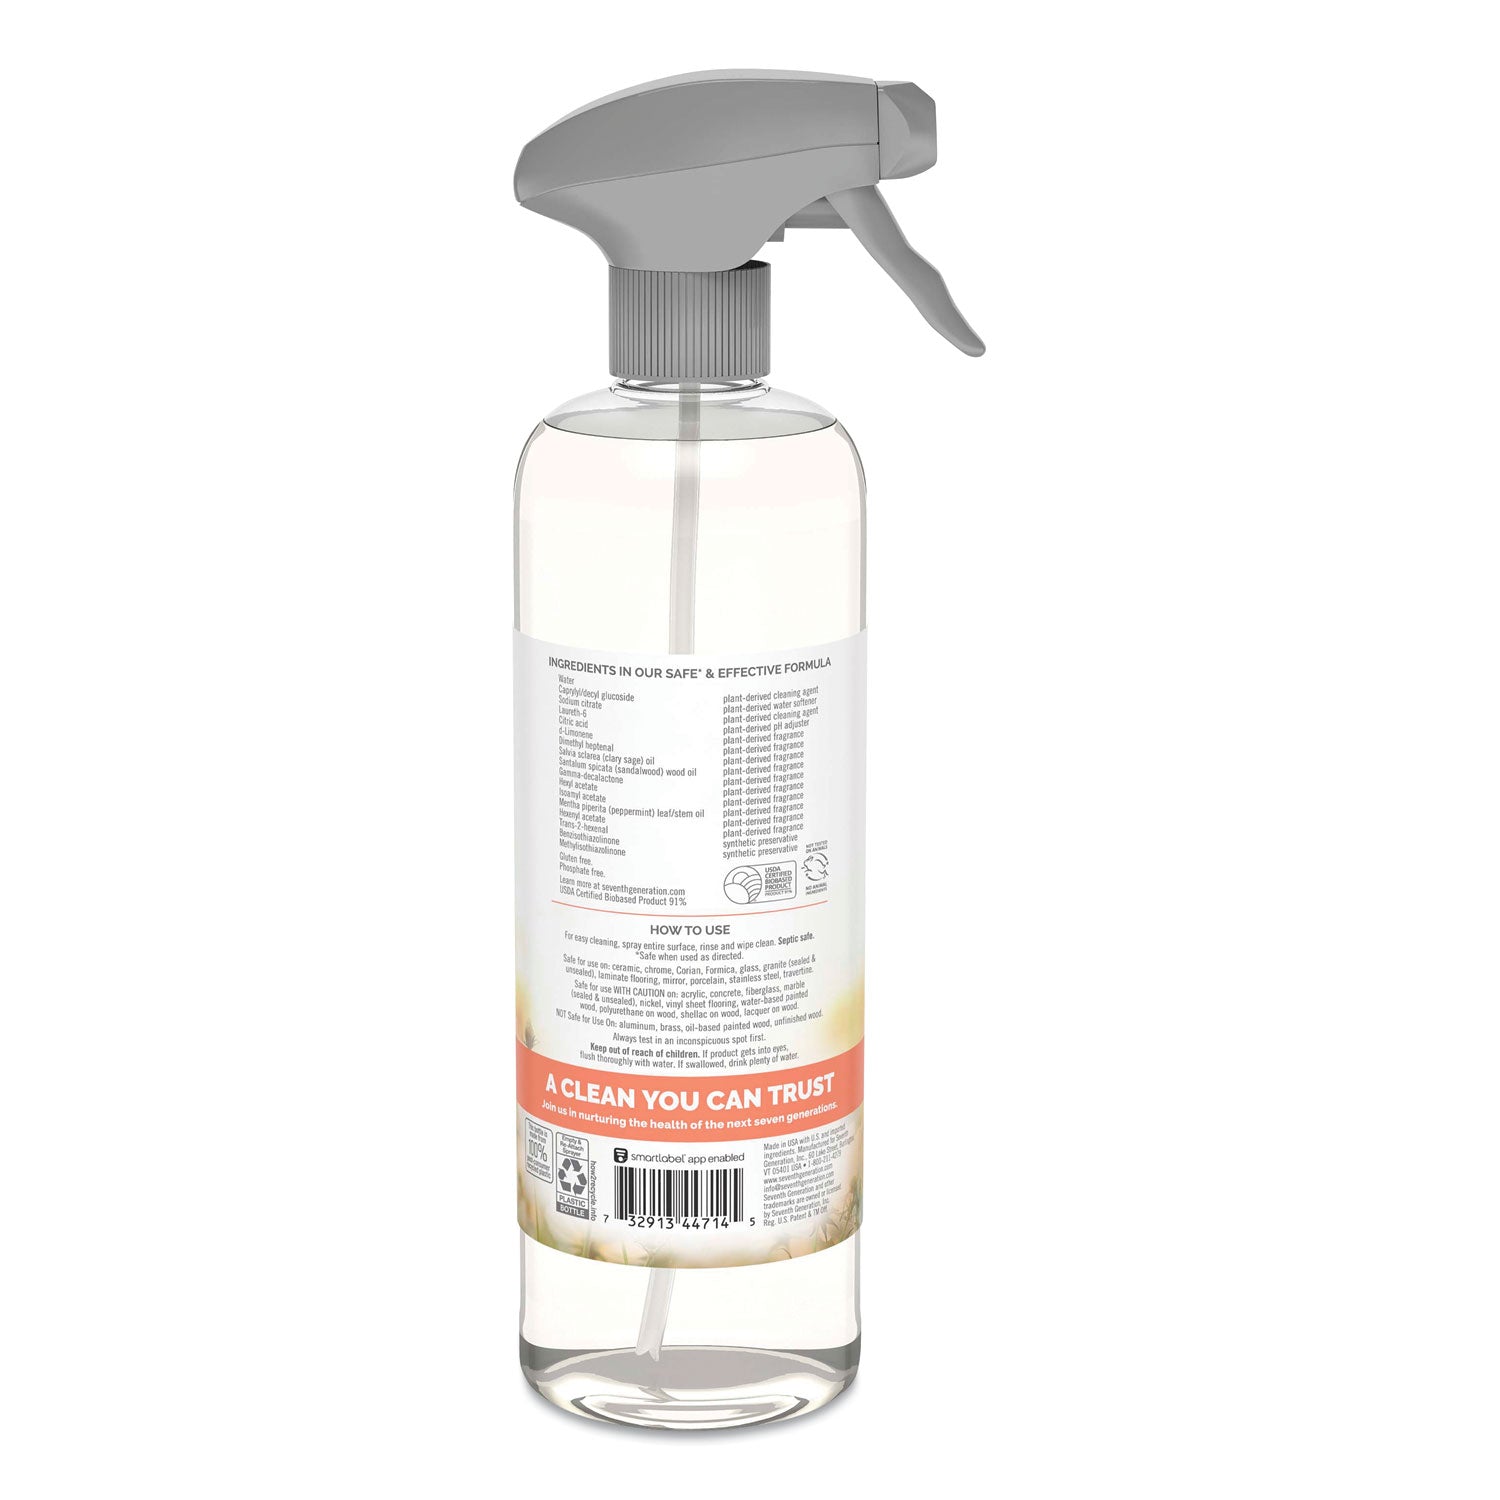 natural-all-purpose-cleaner-morning-meadow-23-oz-trigger-spray-bottle-8-carton_sev44714ct - 2